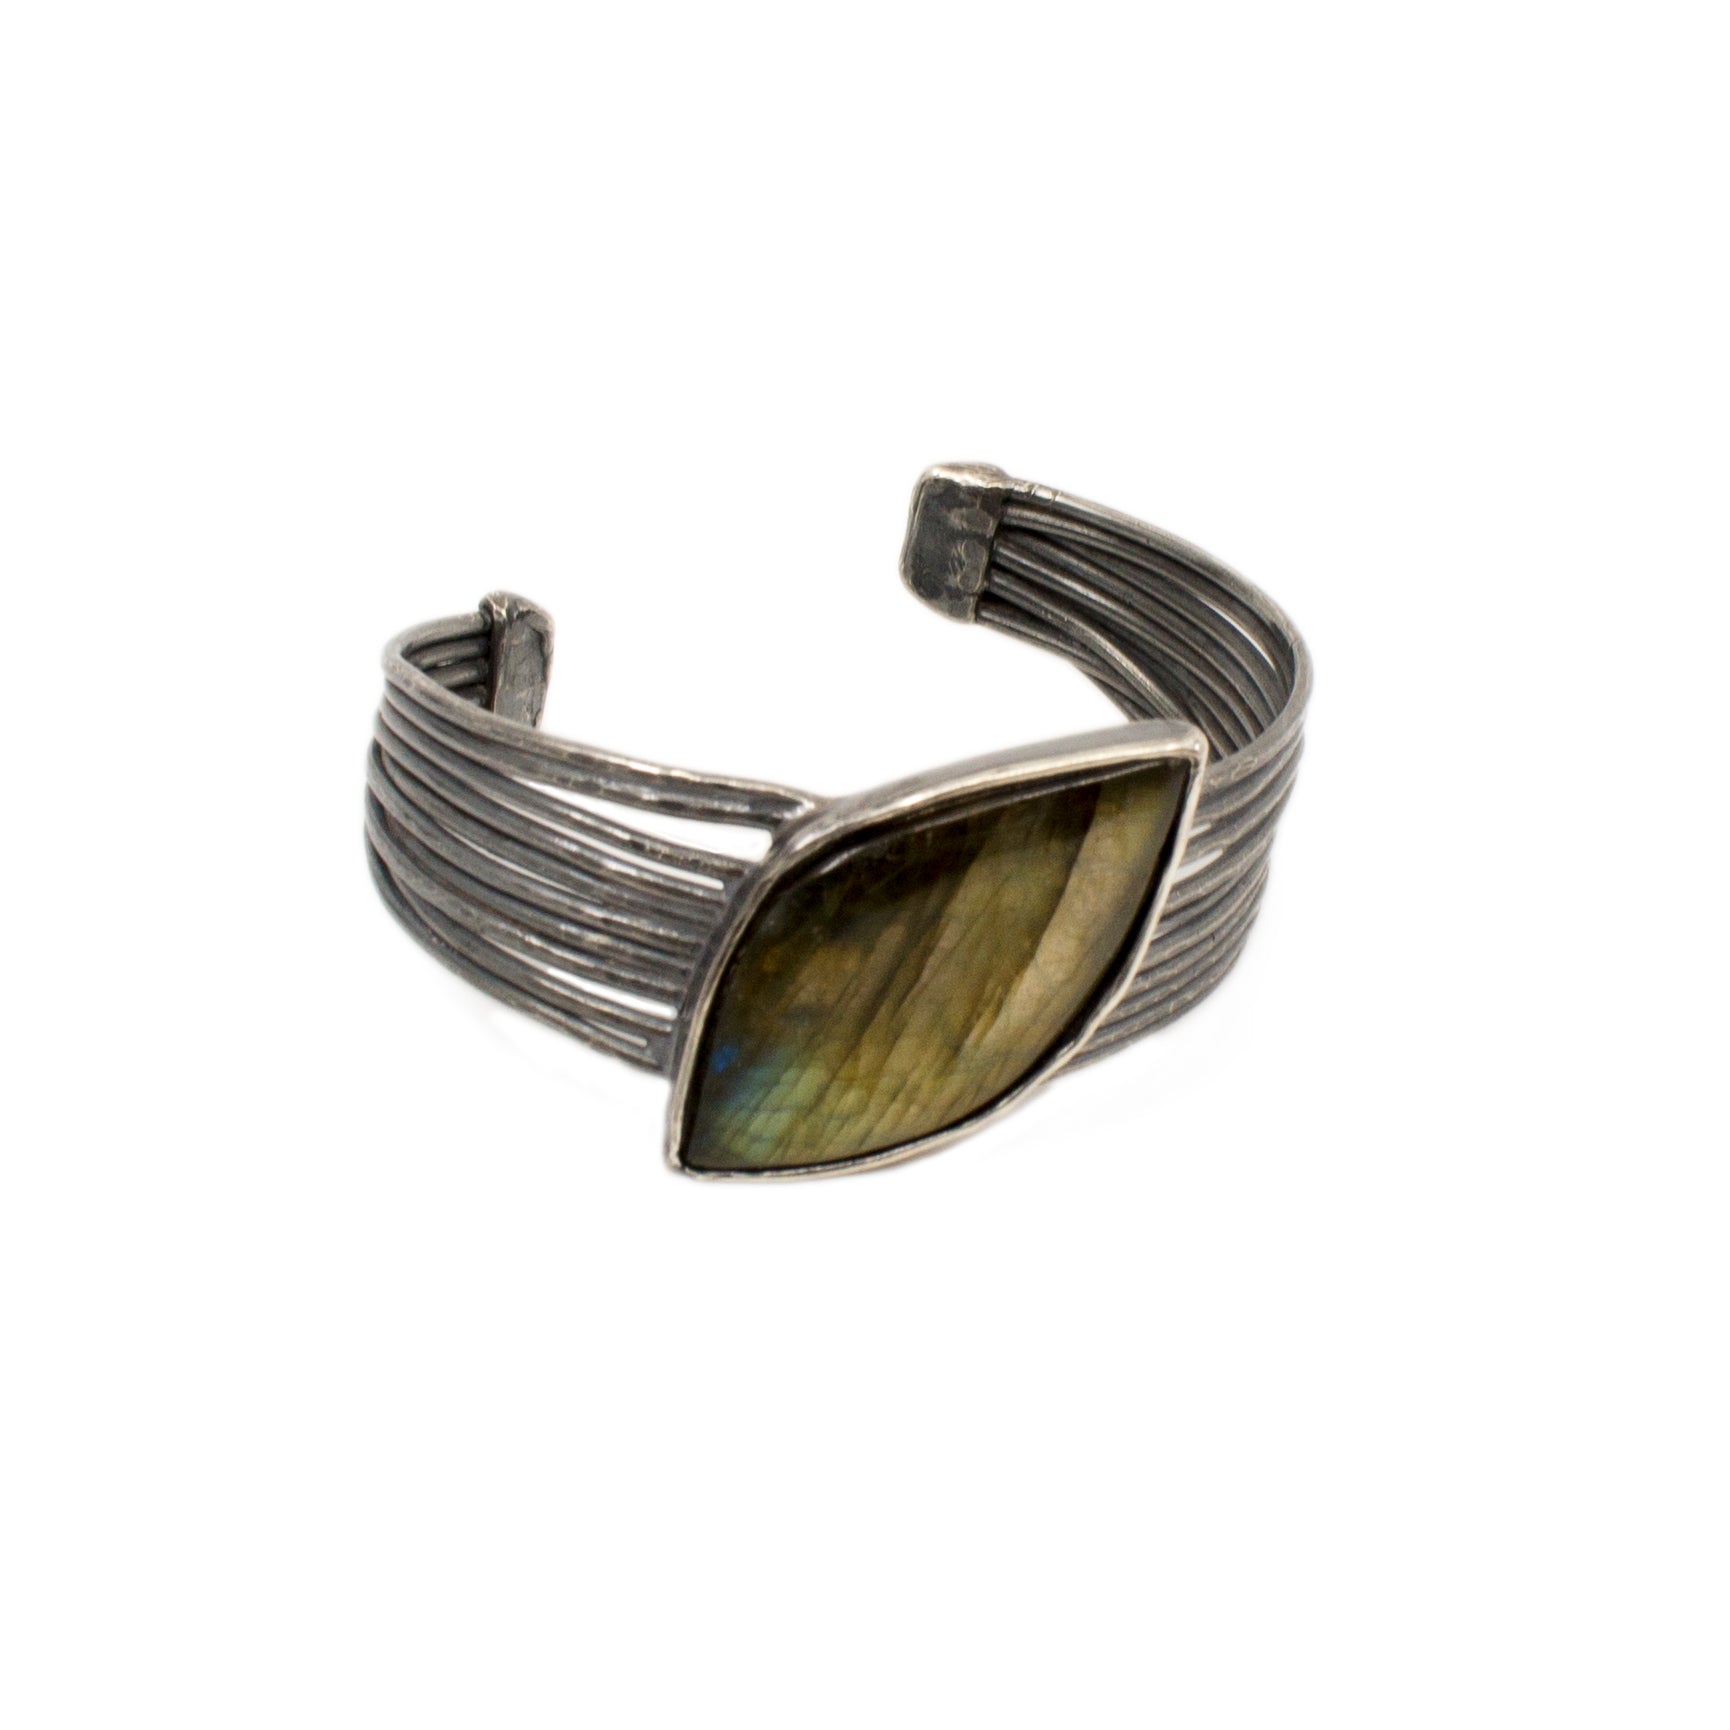 Laced Cuff - Sterling Silver with Labradorite